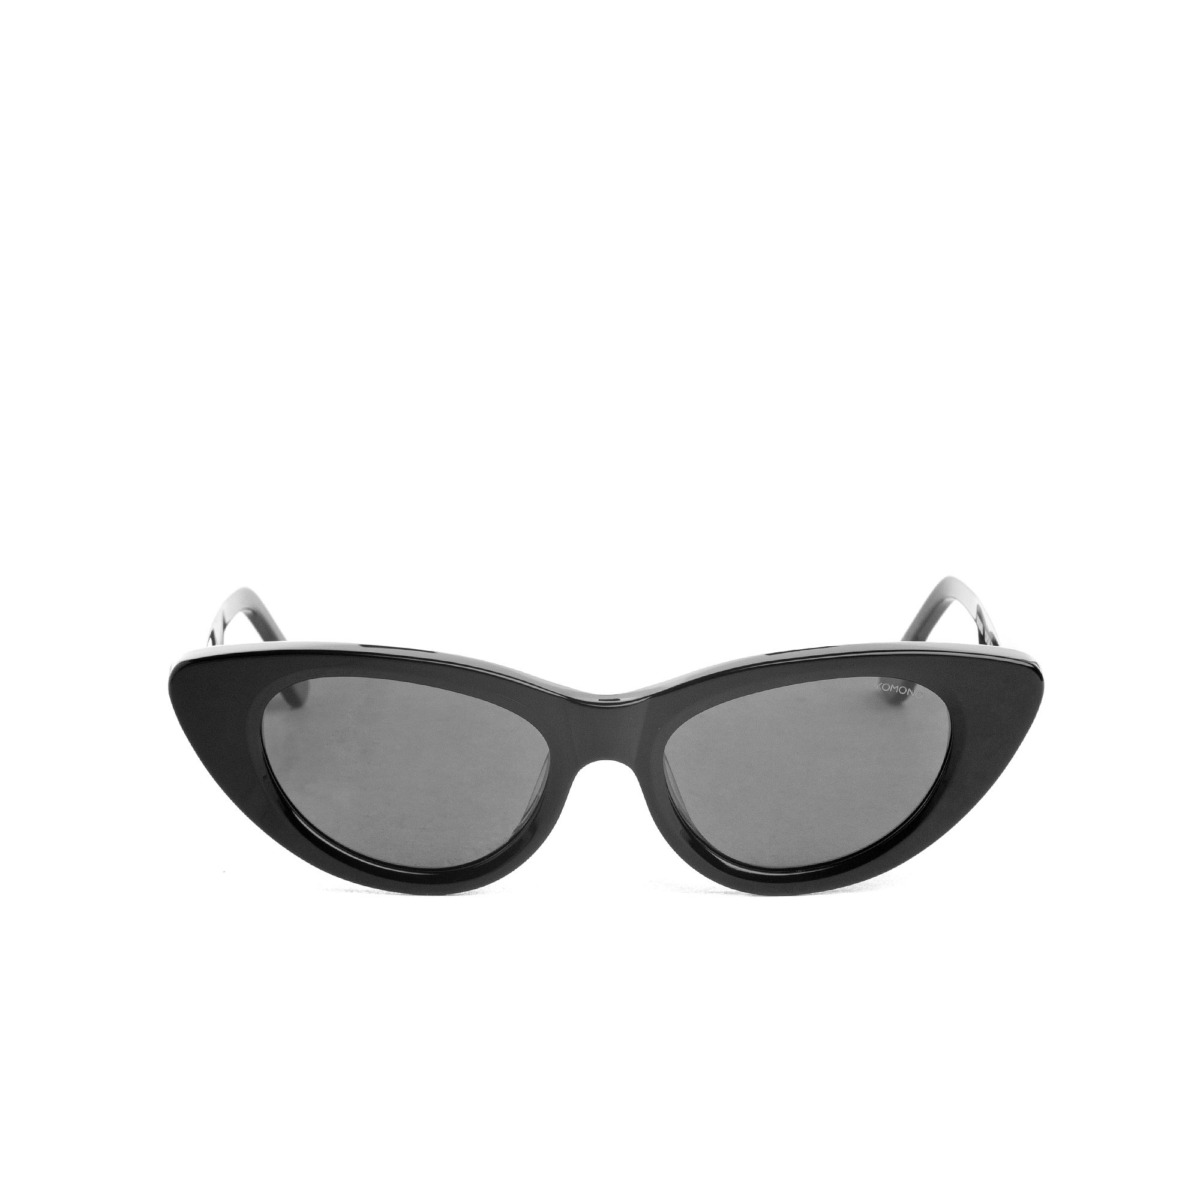 Bstn Komono Solids Kelly Black Female Eyewear Now Available At In One Womens SUNGLASSES GOOFASH